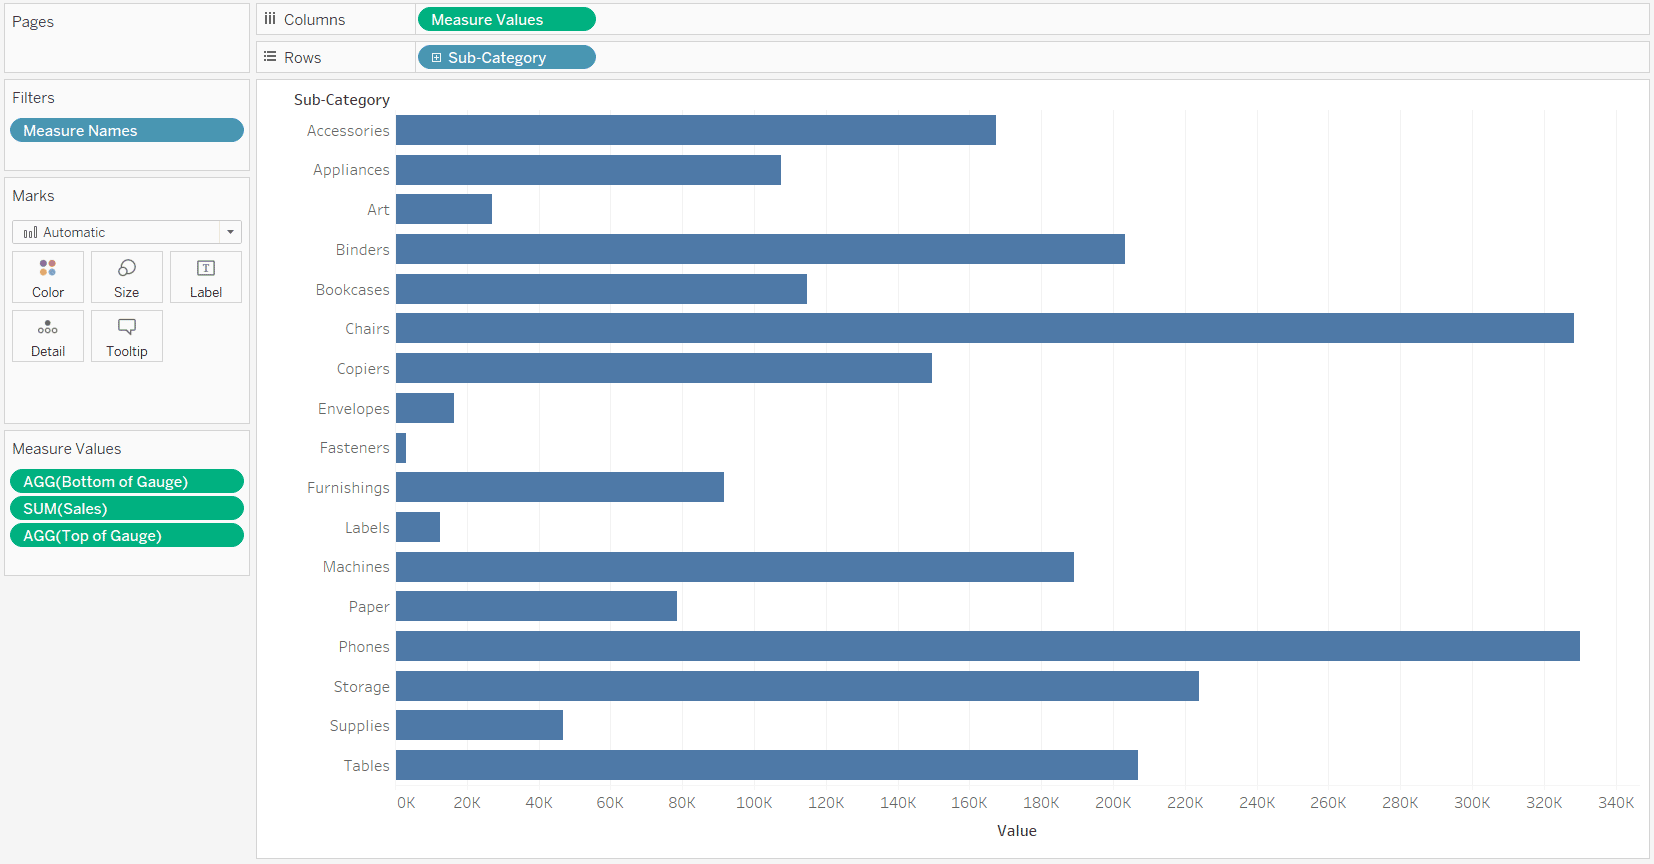 Filtered Measure Values by Sub-Category Bar Chart in Tableau